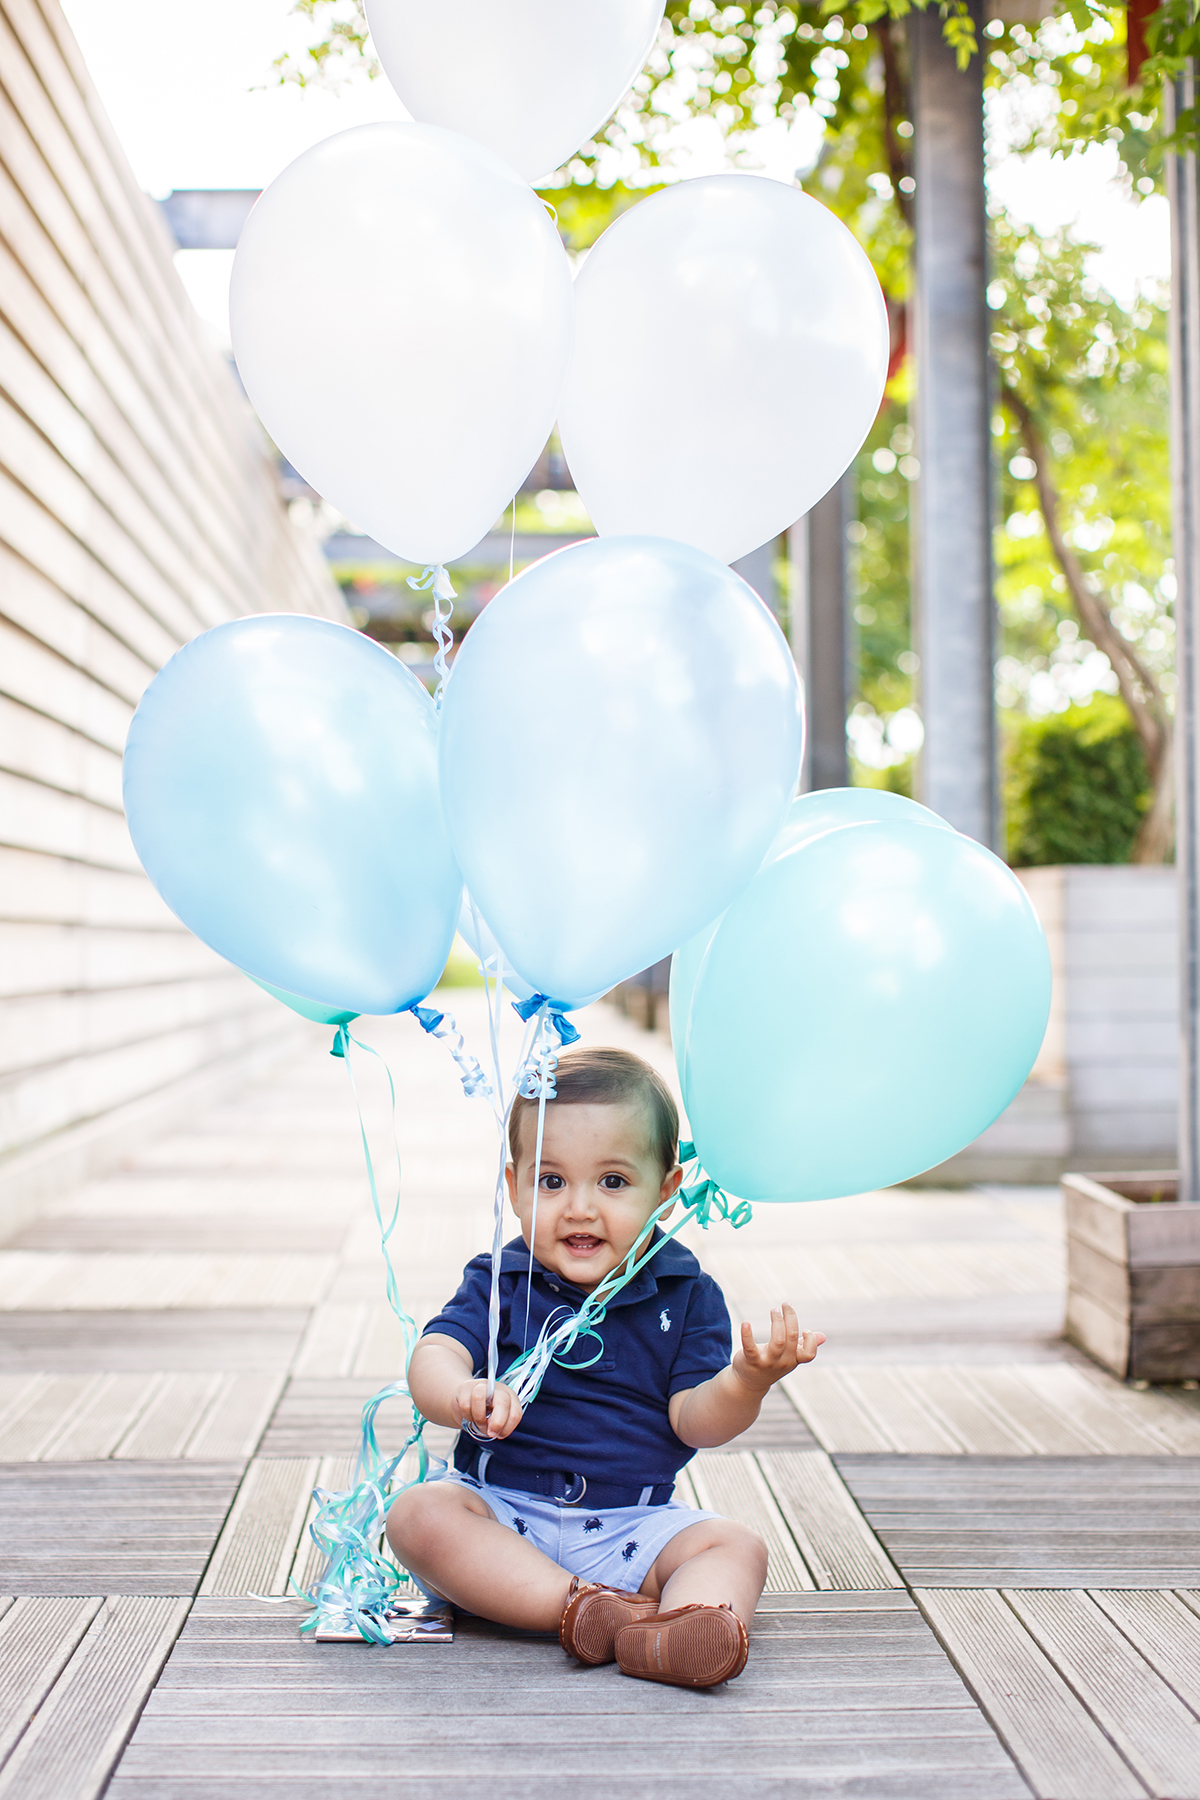 Close up of smiling toddler with white and blue balloons in his hand